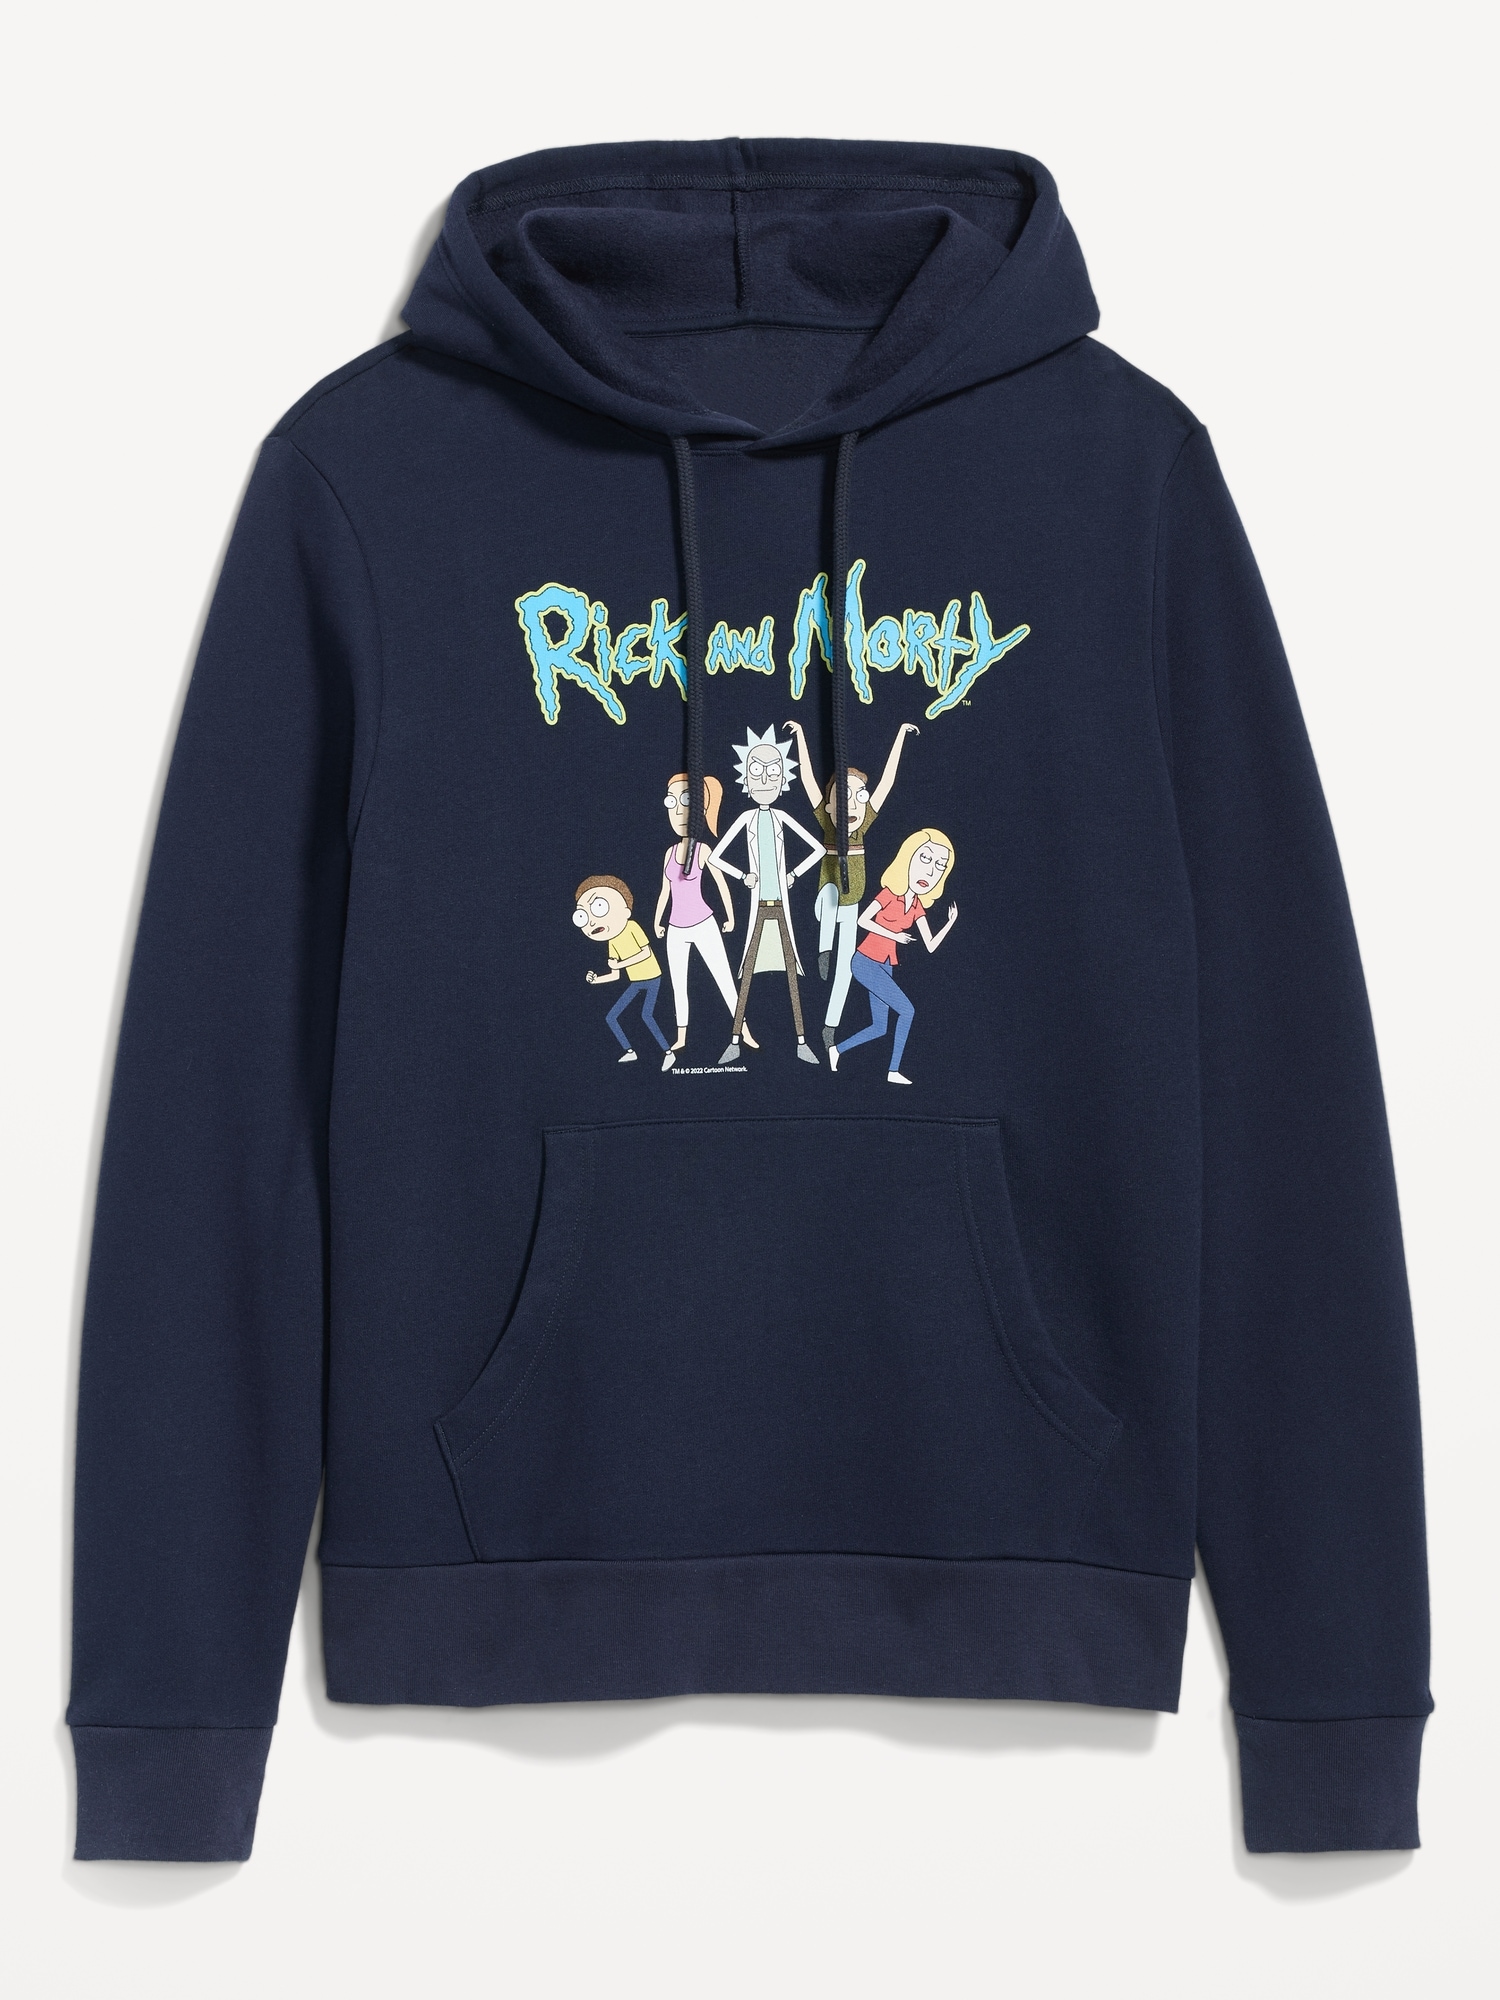 Old Navy Rick and Morty™ Gender-Neutral Pullover Hoodie for Adults blue. 1